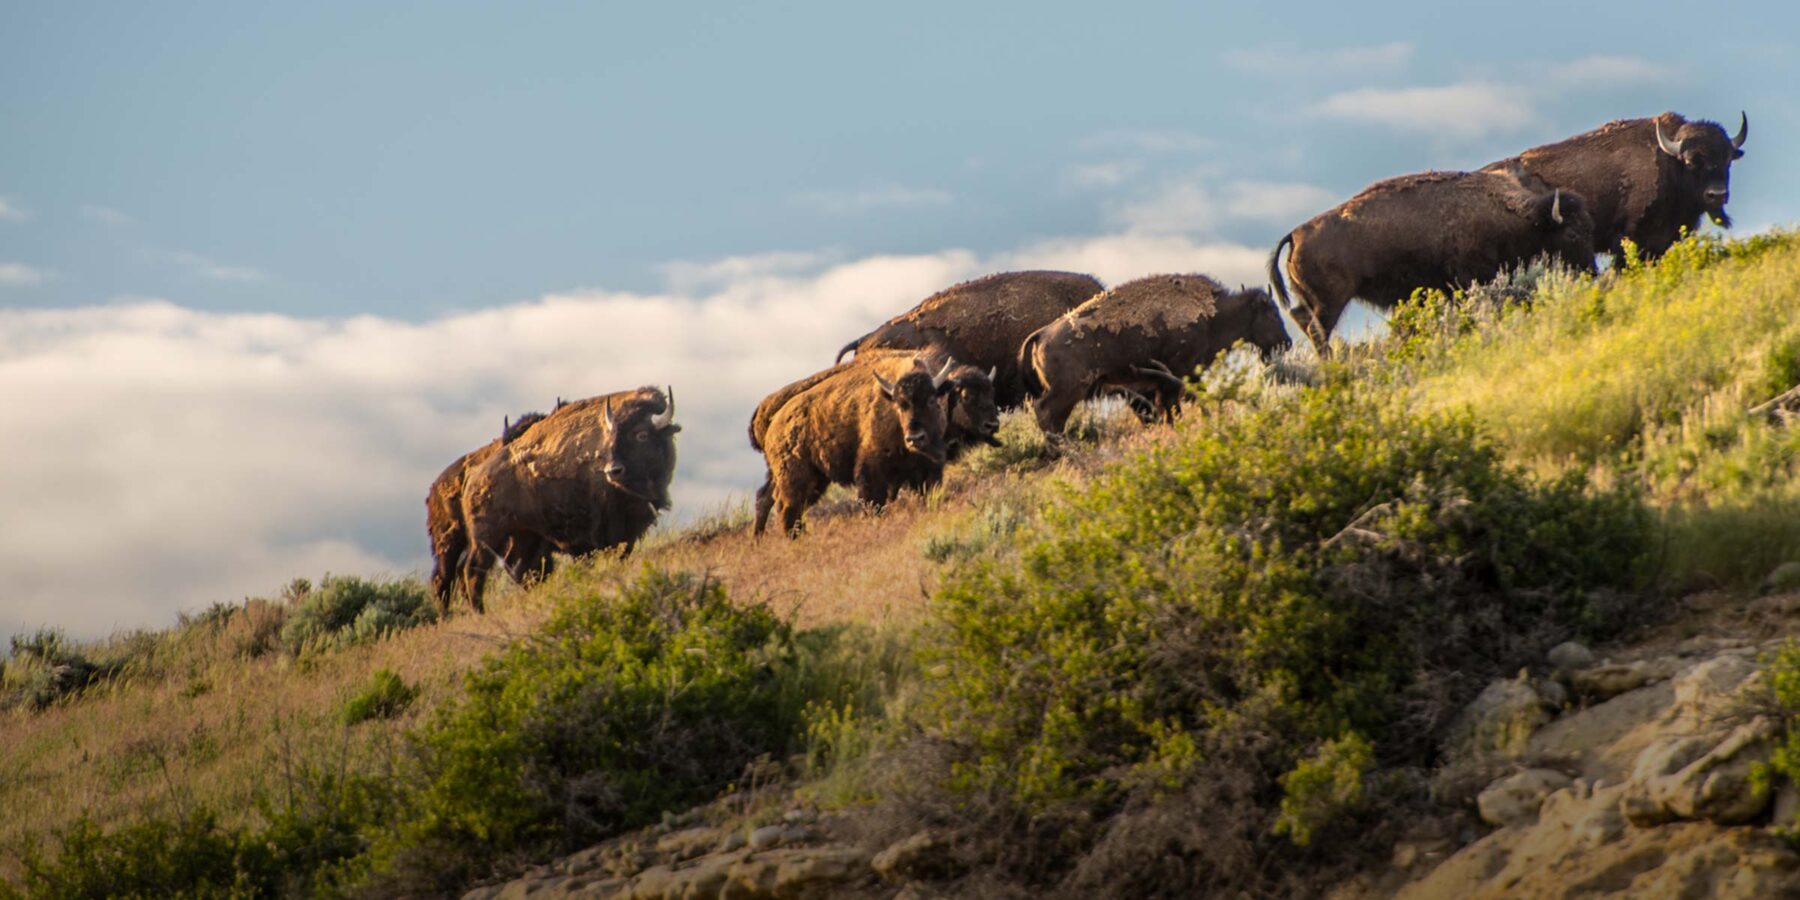 A herd of bison walking up a hill